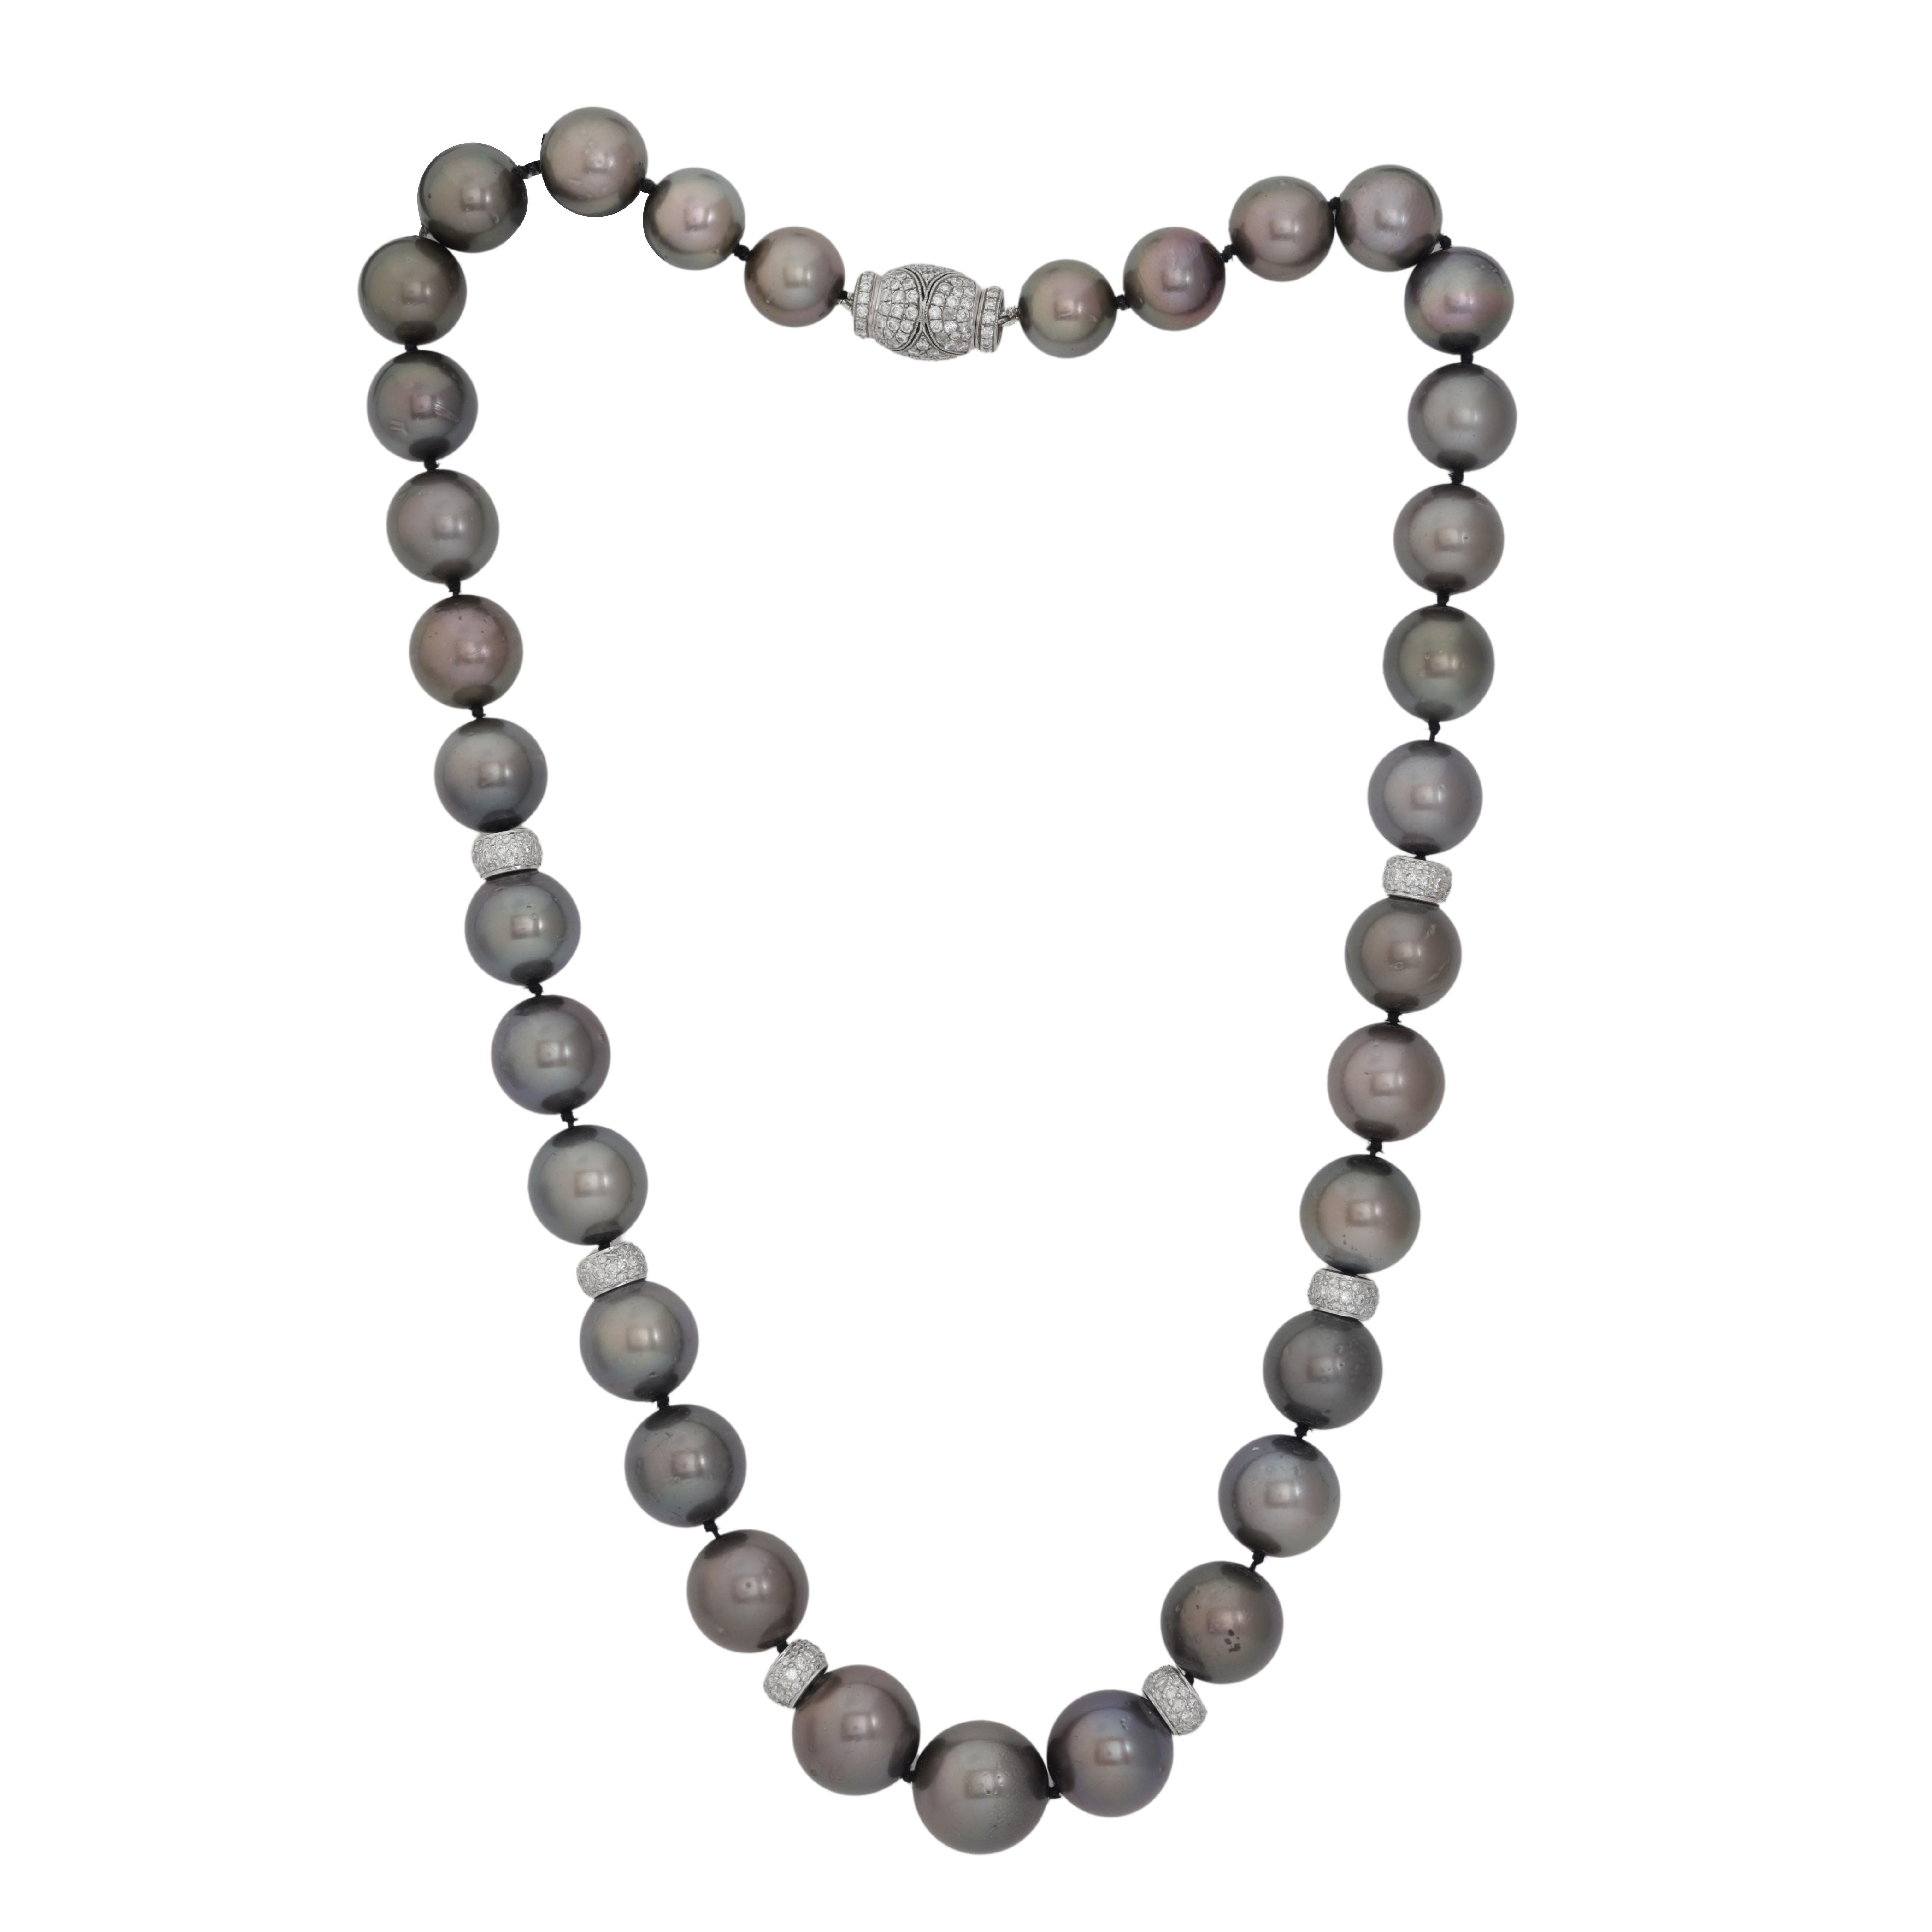 Brilliant Cut Diana M. Diamond pearl necklace adorned with 11-14 mm Tahitian south sea pearls For Sale